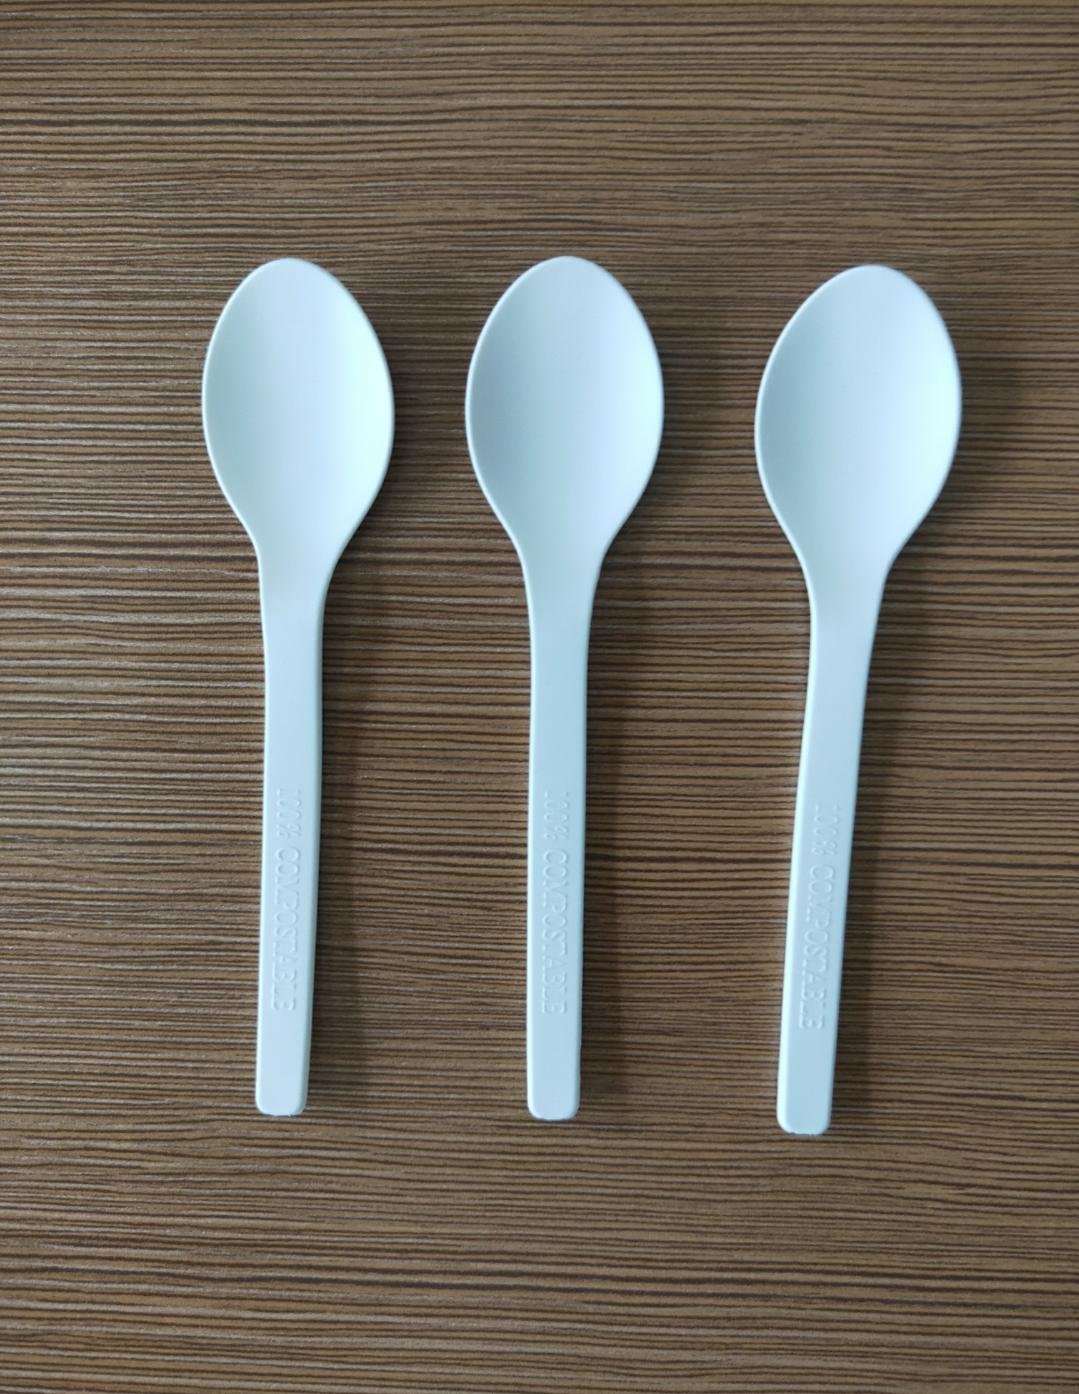 Knife and fork spoon 2